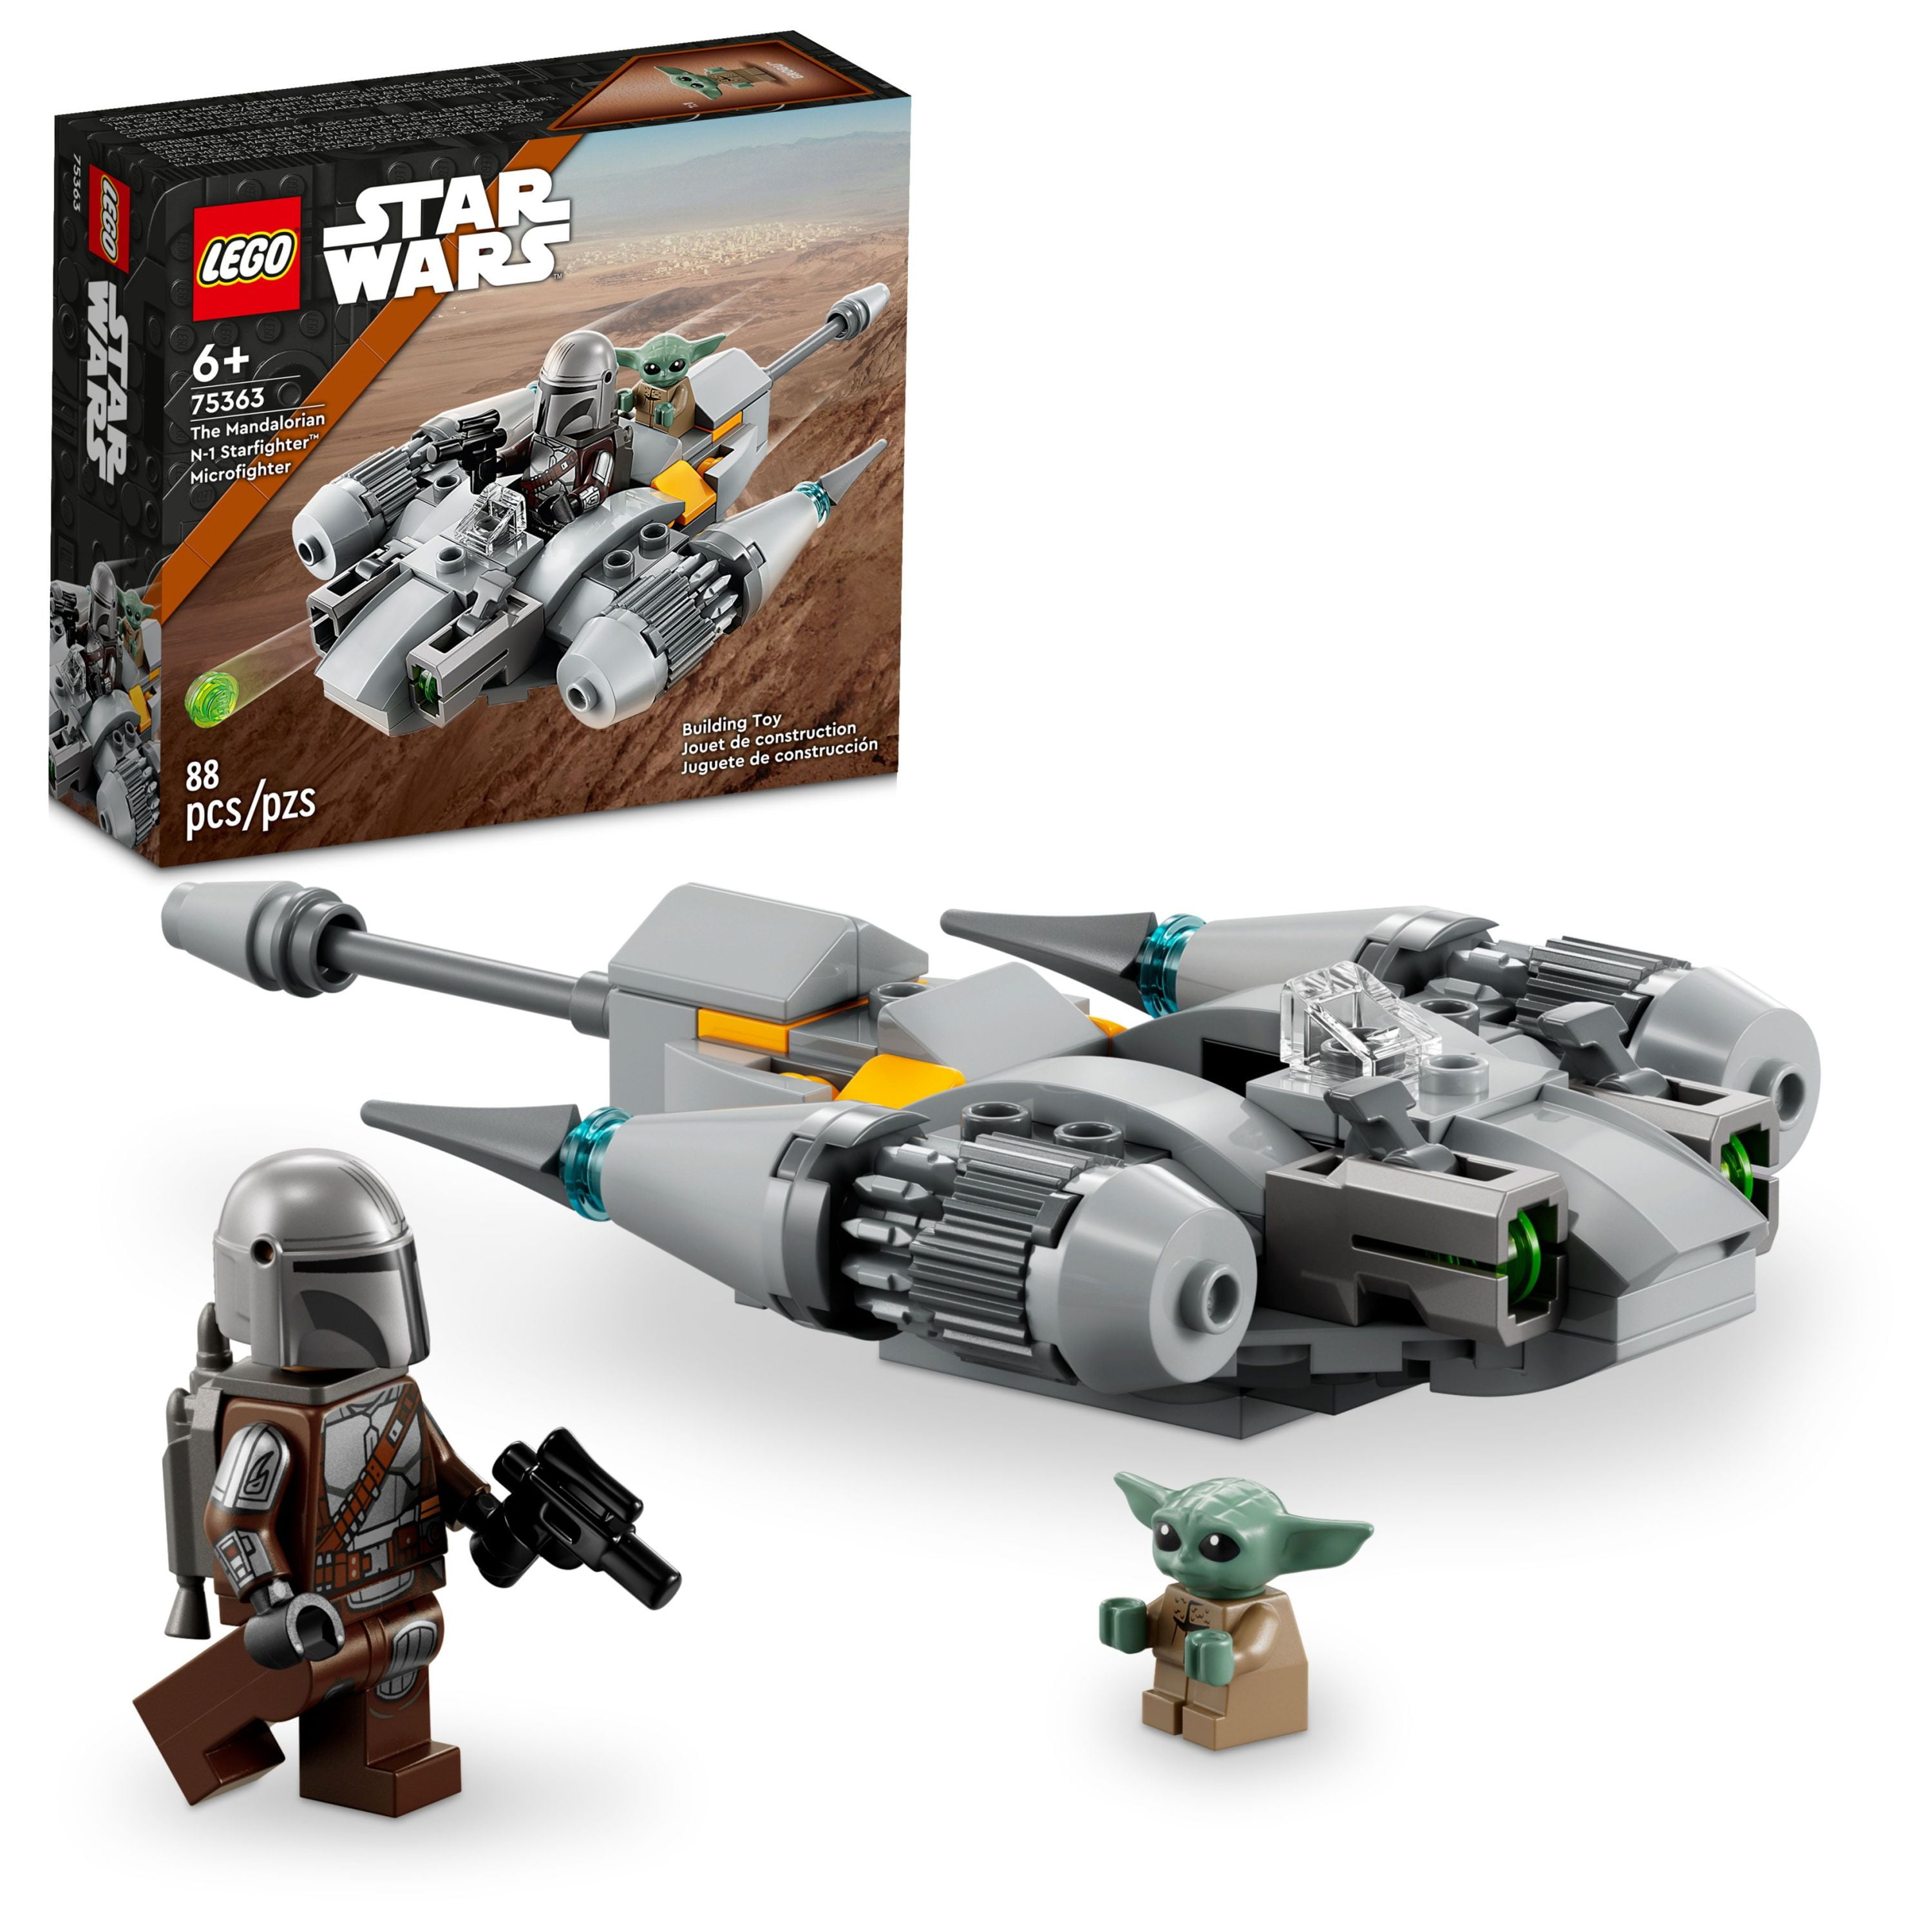 LEGO Star Wars The Mandalorian’s N-1 Starfighter Microfighter 75363  Building Toy Set for Kids Aged 6 and Up with Mando and Grogu 'Baby Yoda